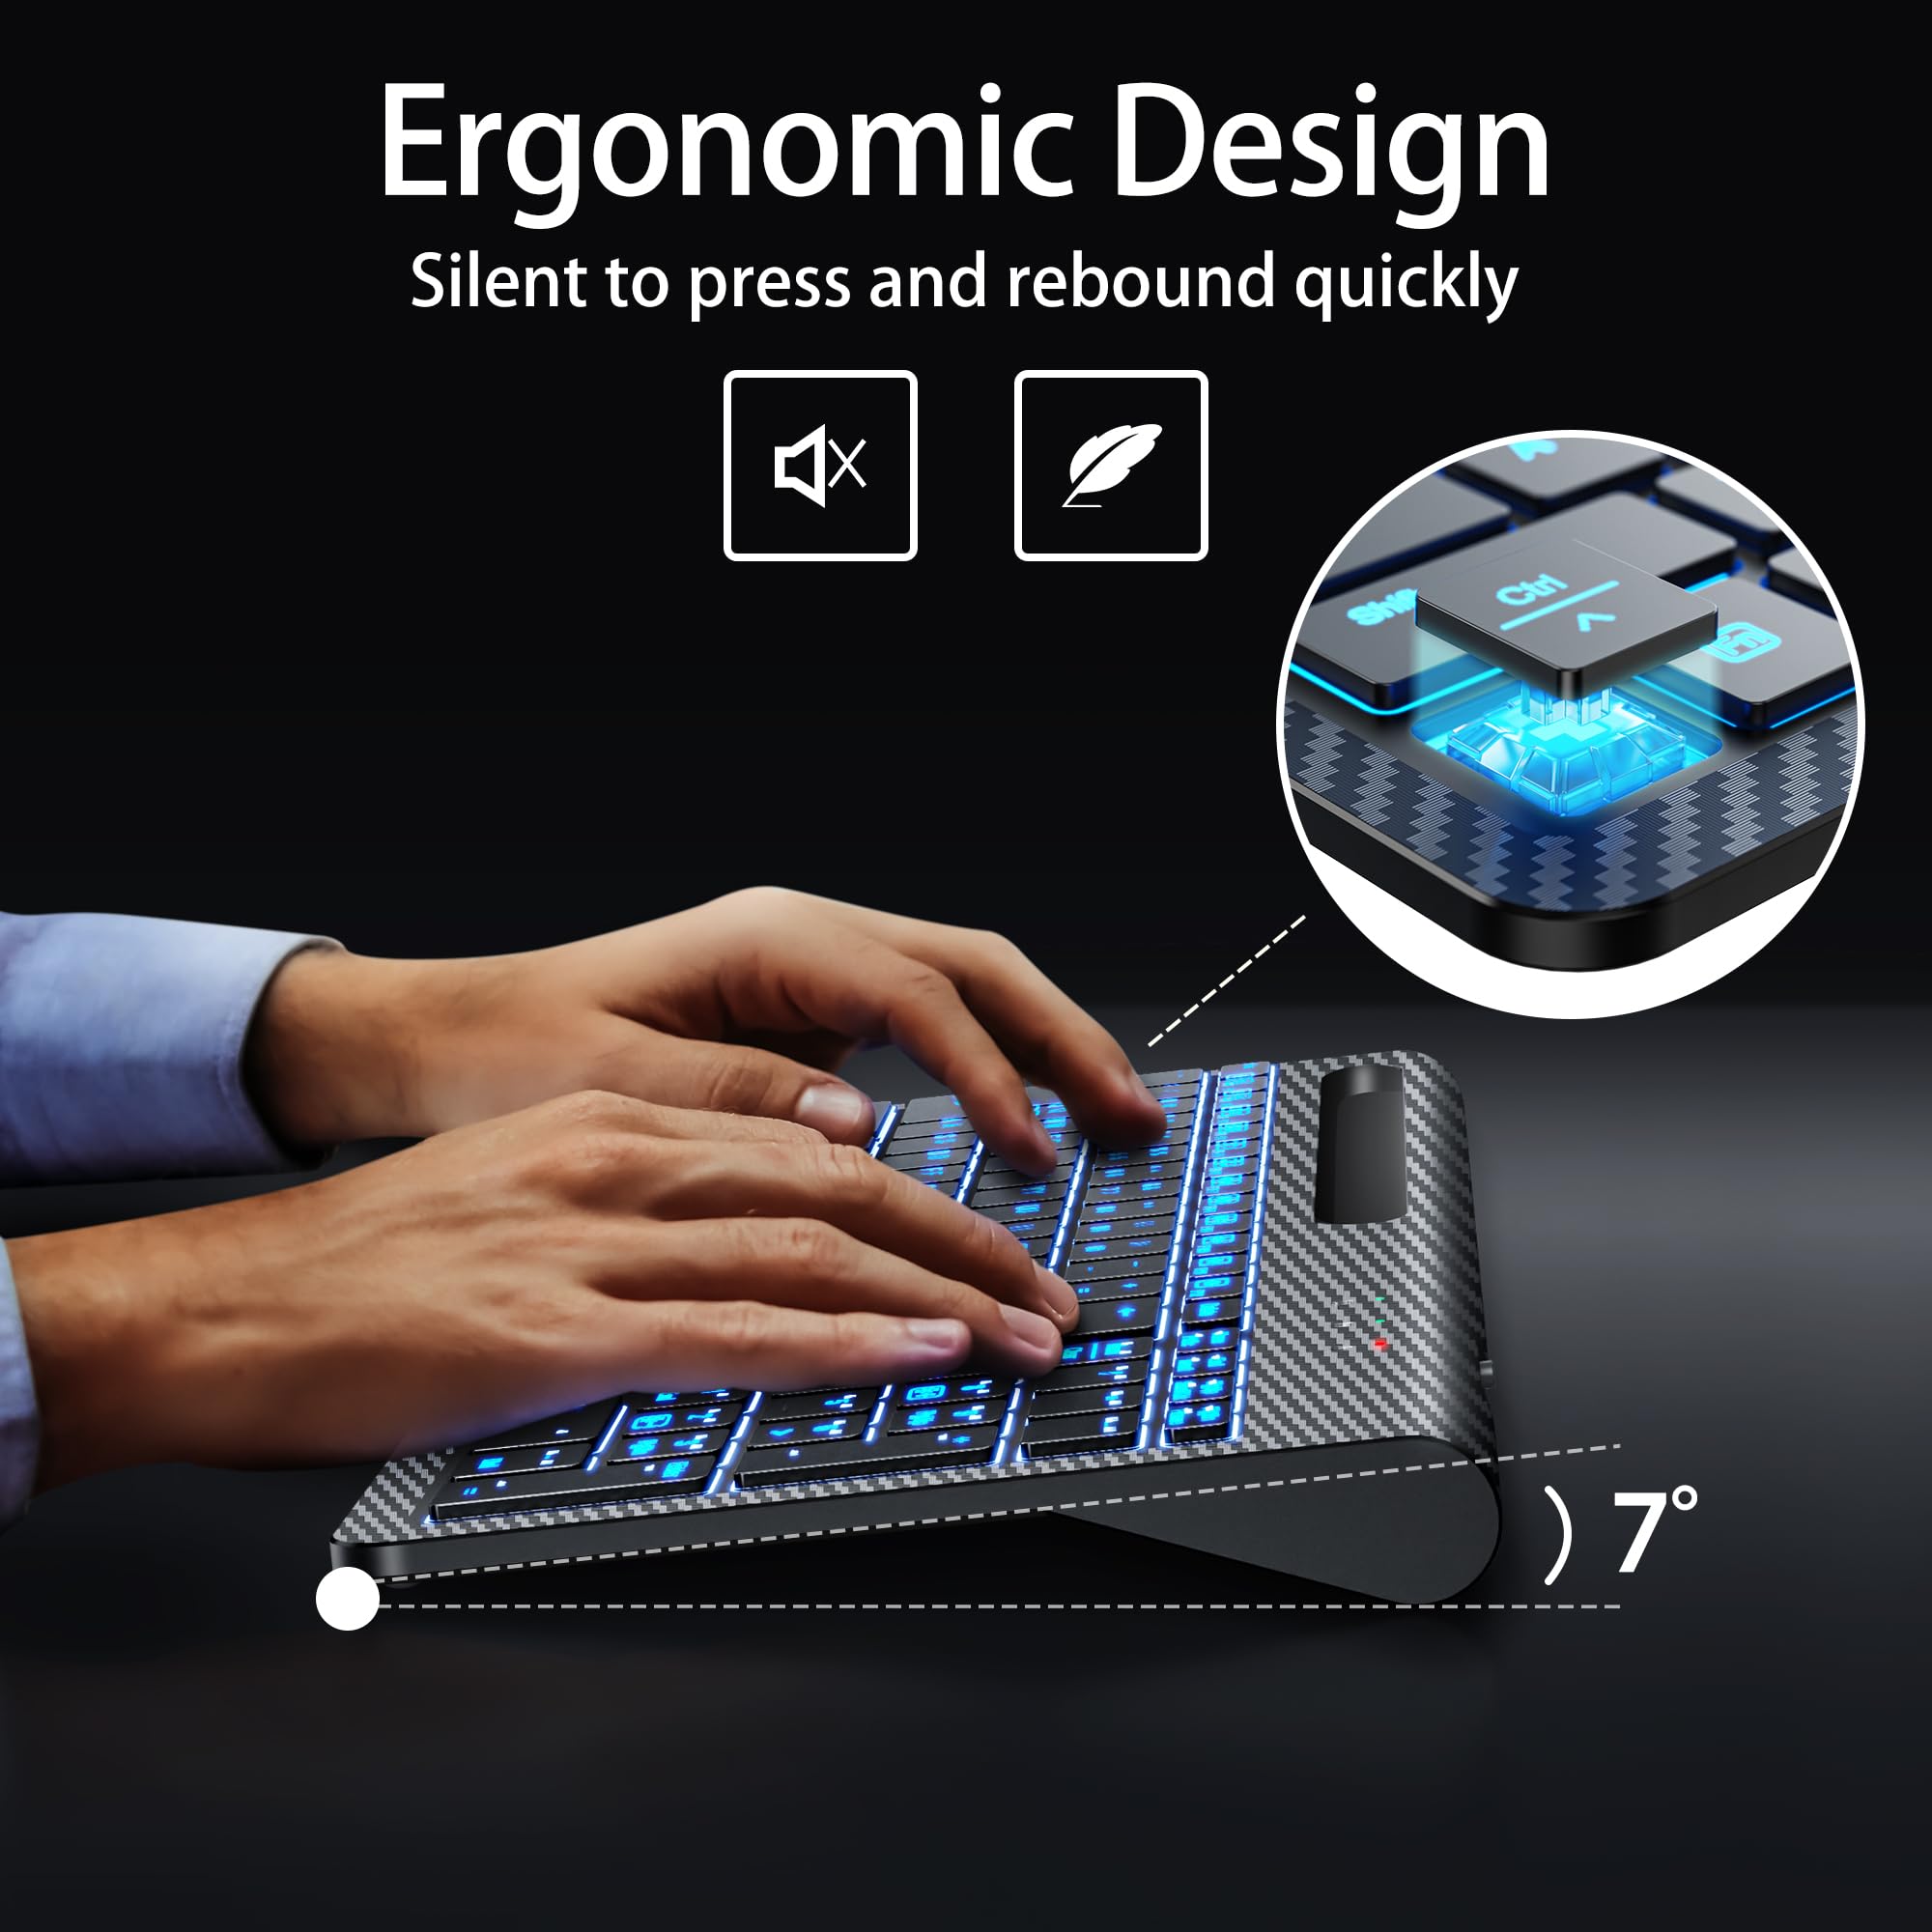 Wireless Keyboard and Mouse, Rechargeable, Adjustable 7 Color Backlight, Ergonomic, Quiet, with Phone Holder, 2.4G Stable Connection Slim Mac Keyboard and Mouse for PC, Laptop, MacBook, Windows